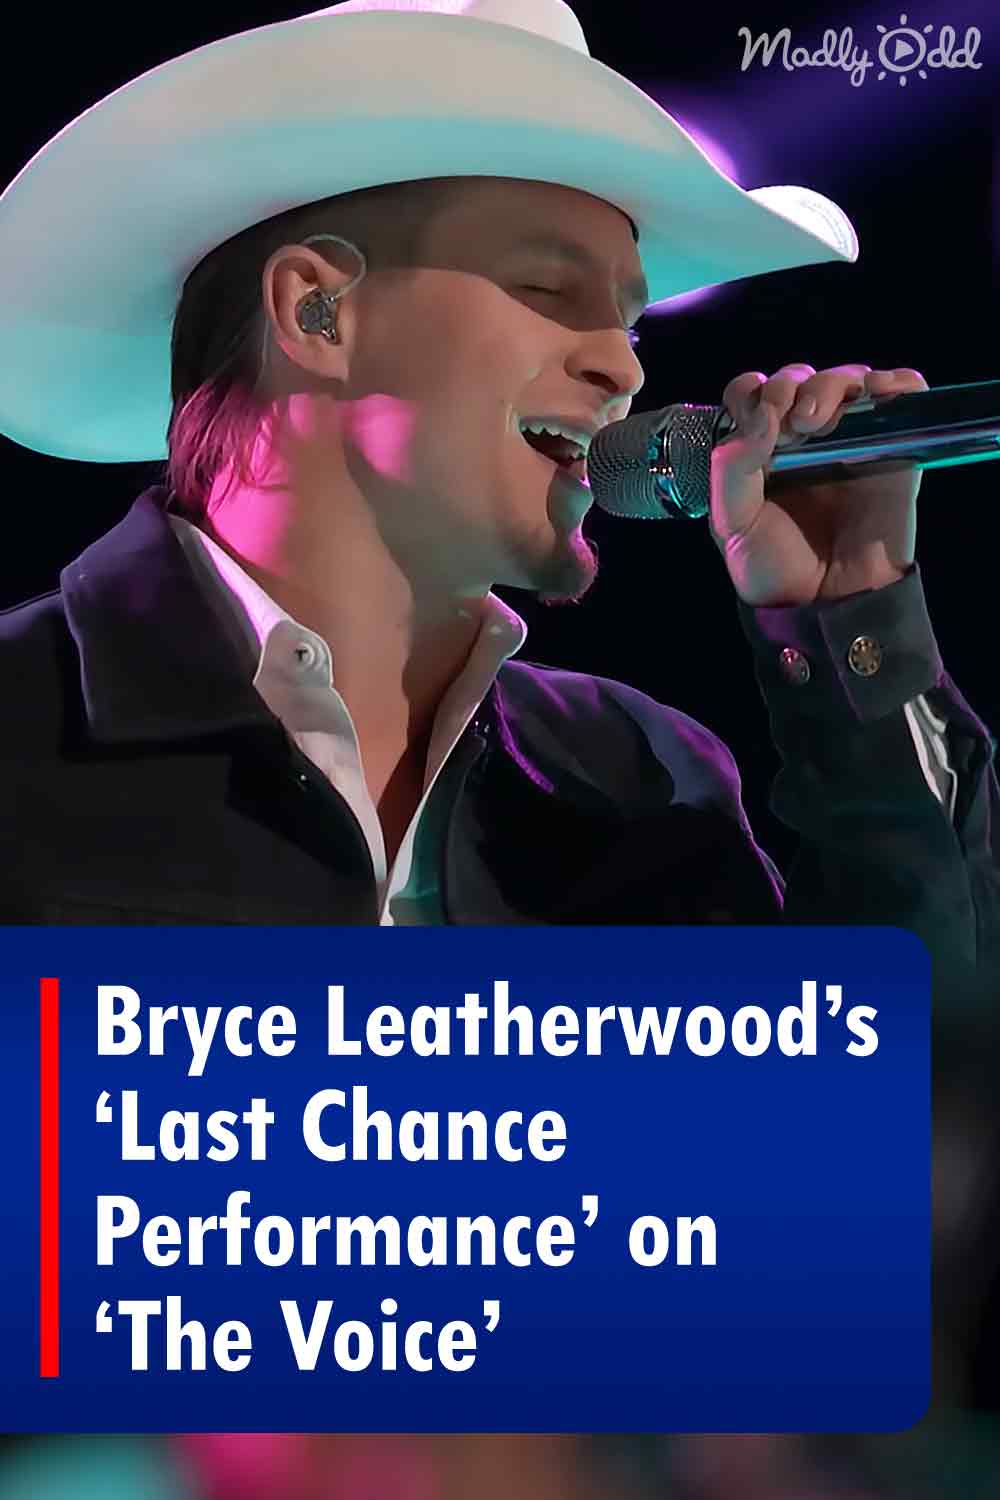 Bryce Leatherwood’s ‘Last Chance Performance’ on ‘The Voice’